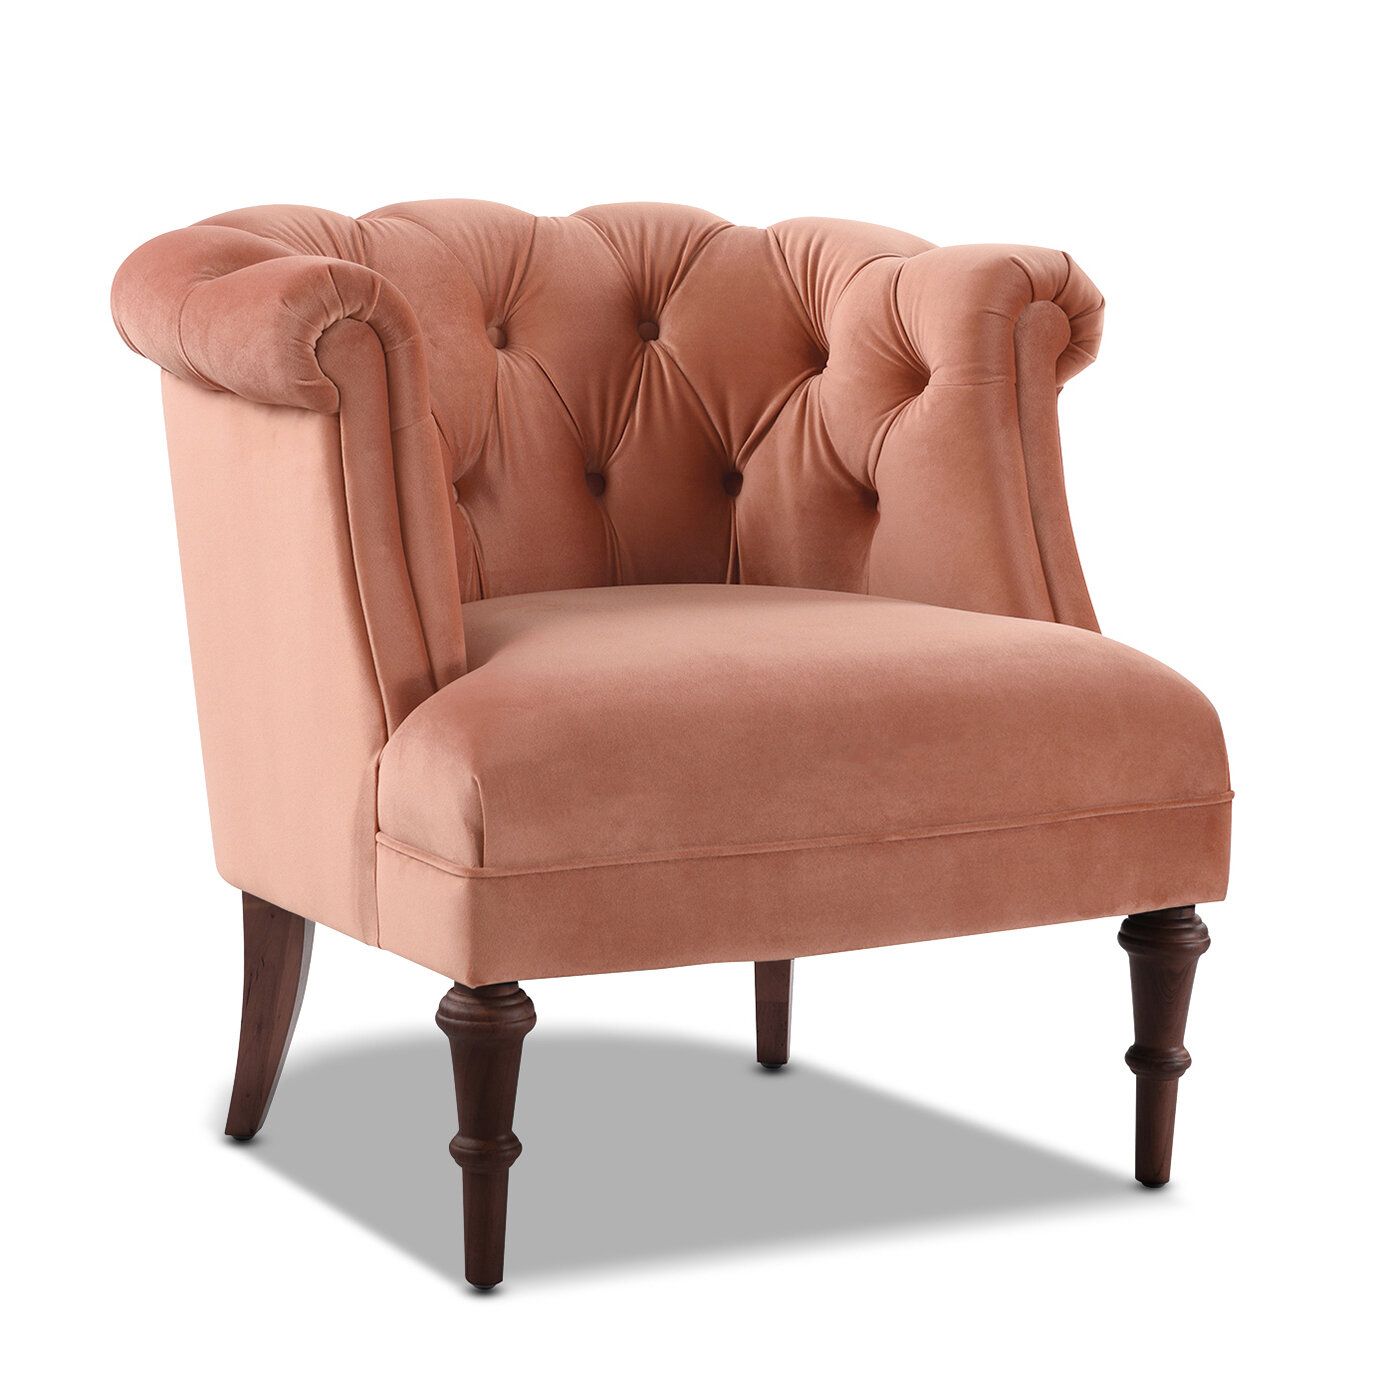 Brown Orange Accent Chairs You'Ll Love In 2021 | Wayfair With Regard To Artressia Barrel Chairs (Photo 15 of 15)